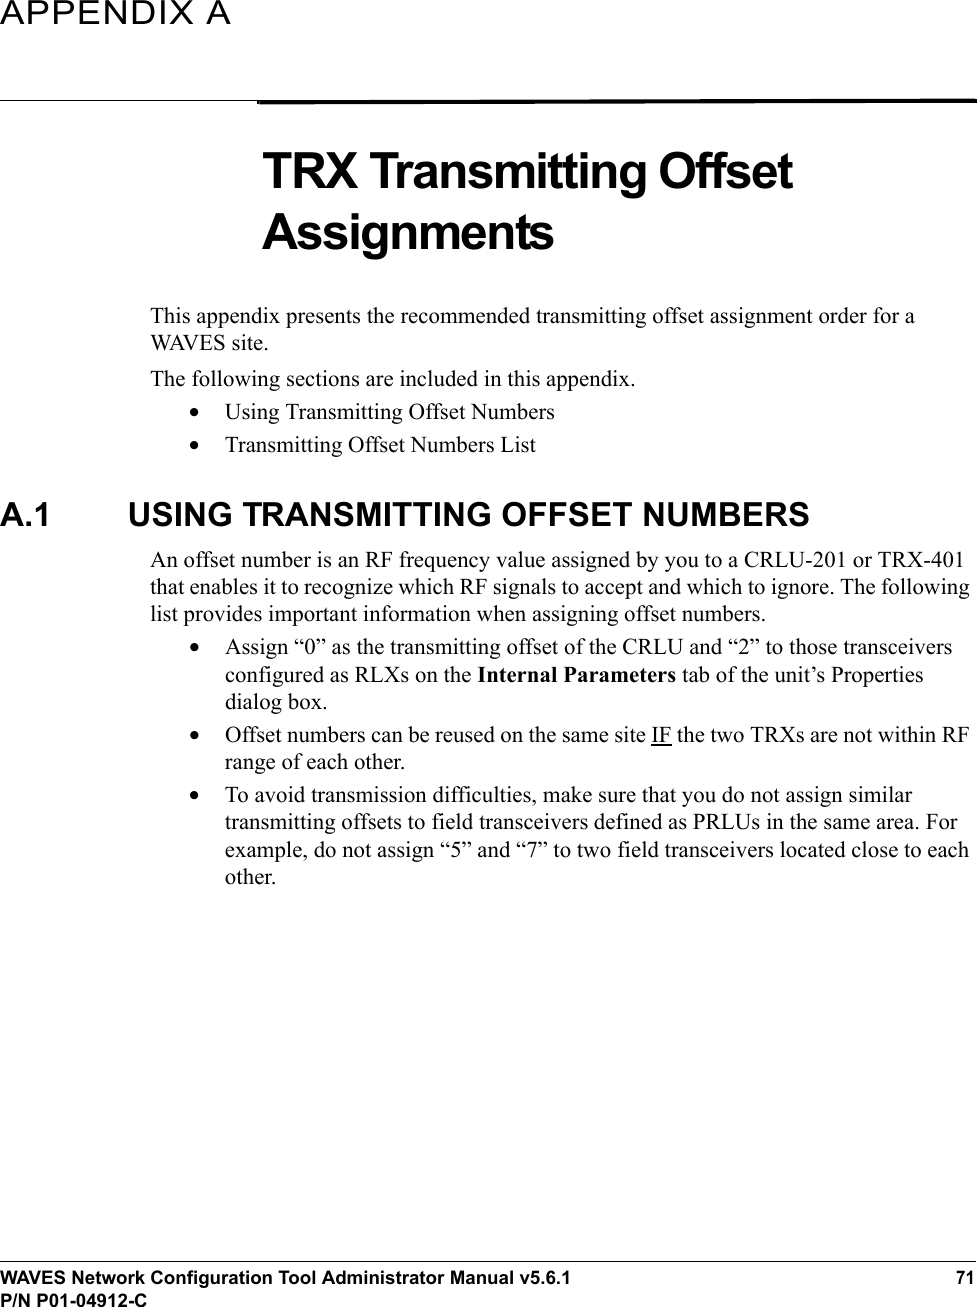 WAVES Network Configuration Tool Administrator Manual v5.6.171P/N P01-04912-CAPPENDIX ATRX Transmitting Offset AssignmentsThis appendix presents the recommended transmitting offset assignment order for a WAVES site.The following sections are included in this appendix.•Using Transmitting Offset Numbers•Transmitting Offset Numbers ListA.1 USING TRANSMITTING OFFSET NUMBERSAn offset number is an RF frequency value assigned by you to a CRLU-201 or TRX-401 that enables it to recognize which RF signals to accept and which to ignore. The following list provides important information when assigning offset numbers.•Assign “0” as the transmitting offset of the CRLU and “2” to those transceivers configured as RLXs on the Internal Parameters tab of the unit’s Properties dialog box.•Offset numbers can be reused on the same site IF the two TRXs are not within RF range of each other. •To avoid transmission difficulties, make sure that you do not assign similar transmitting offsets to field transceivers defined as PRLUs in the same area. For example, do not assign “5” and “7” to two field transceivers located close to each other.